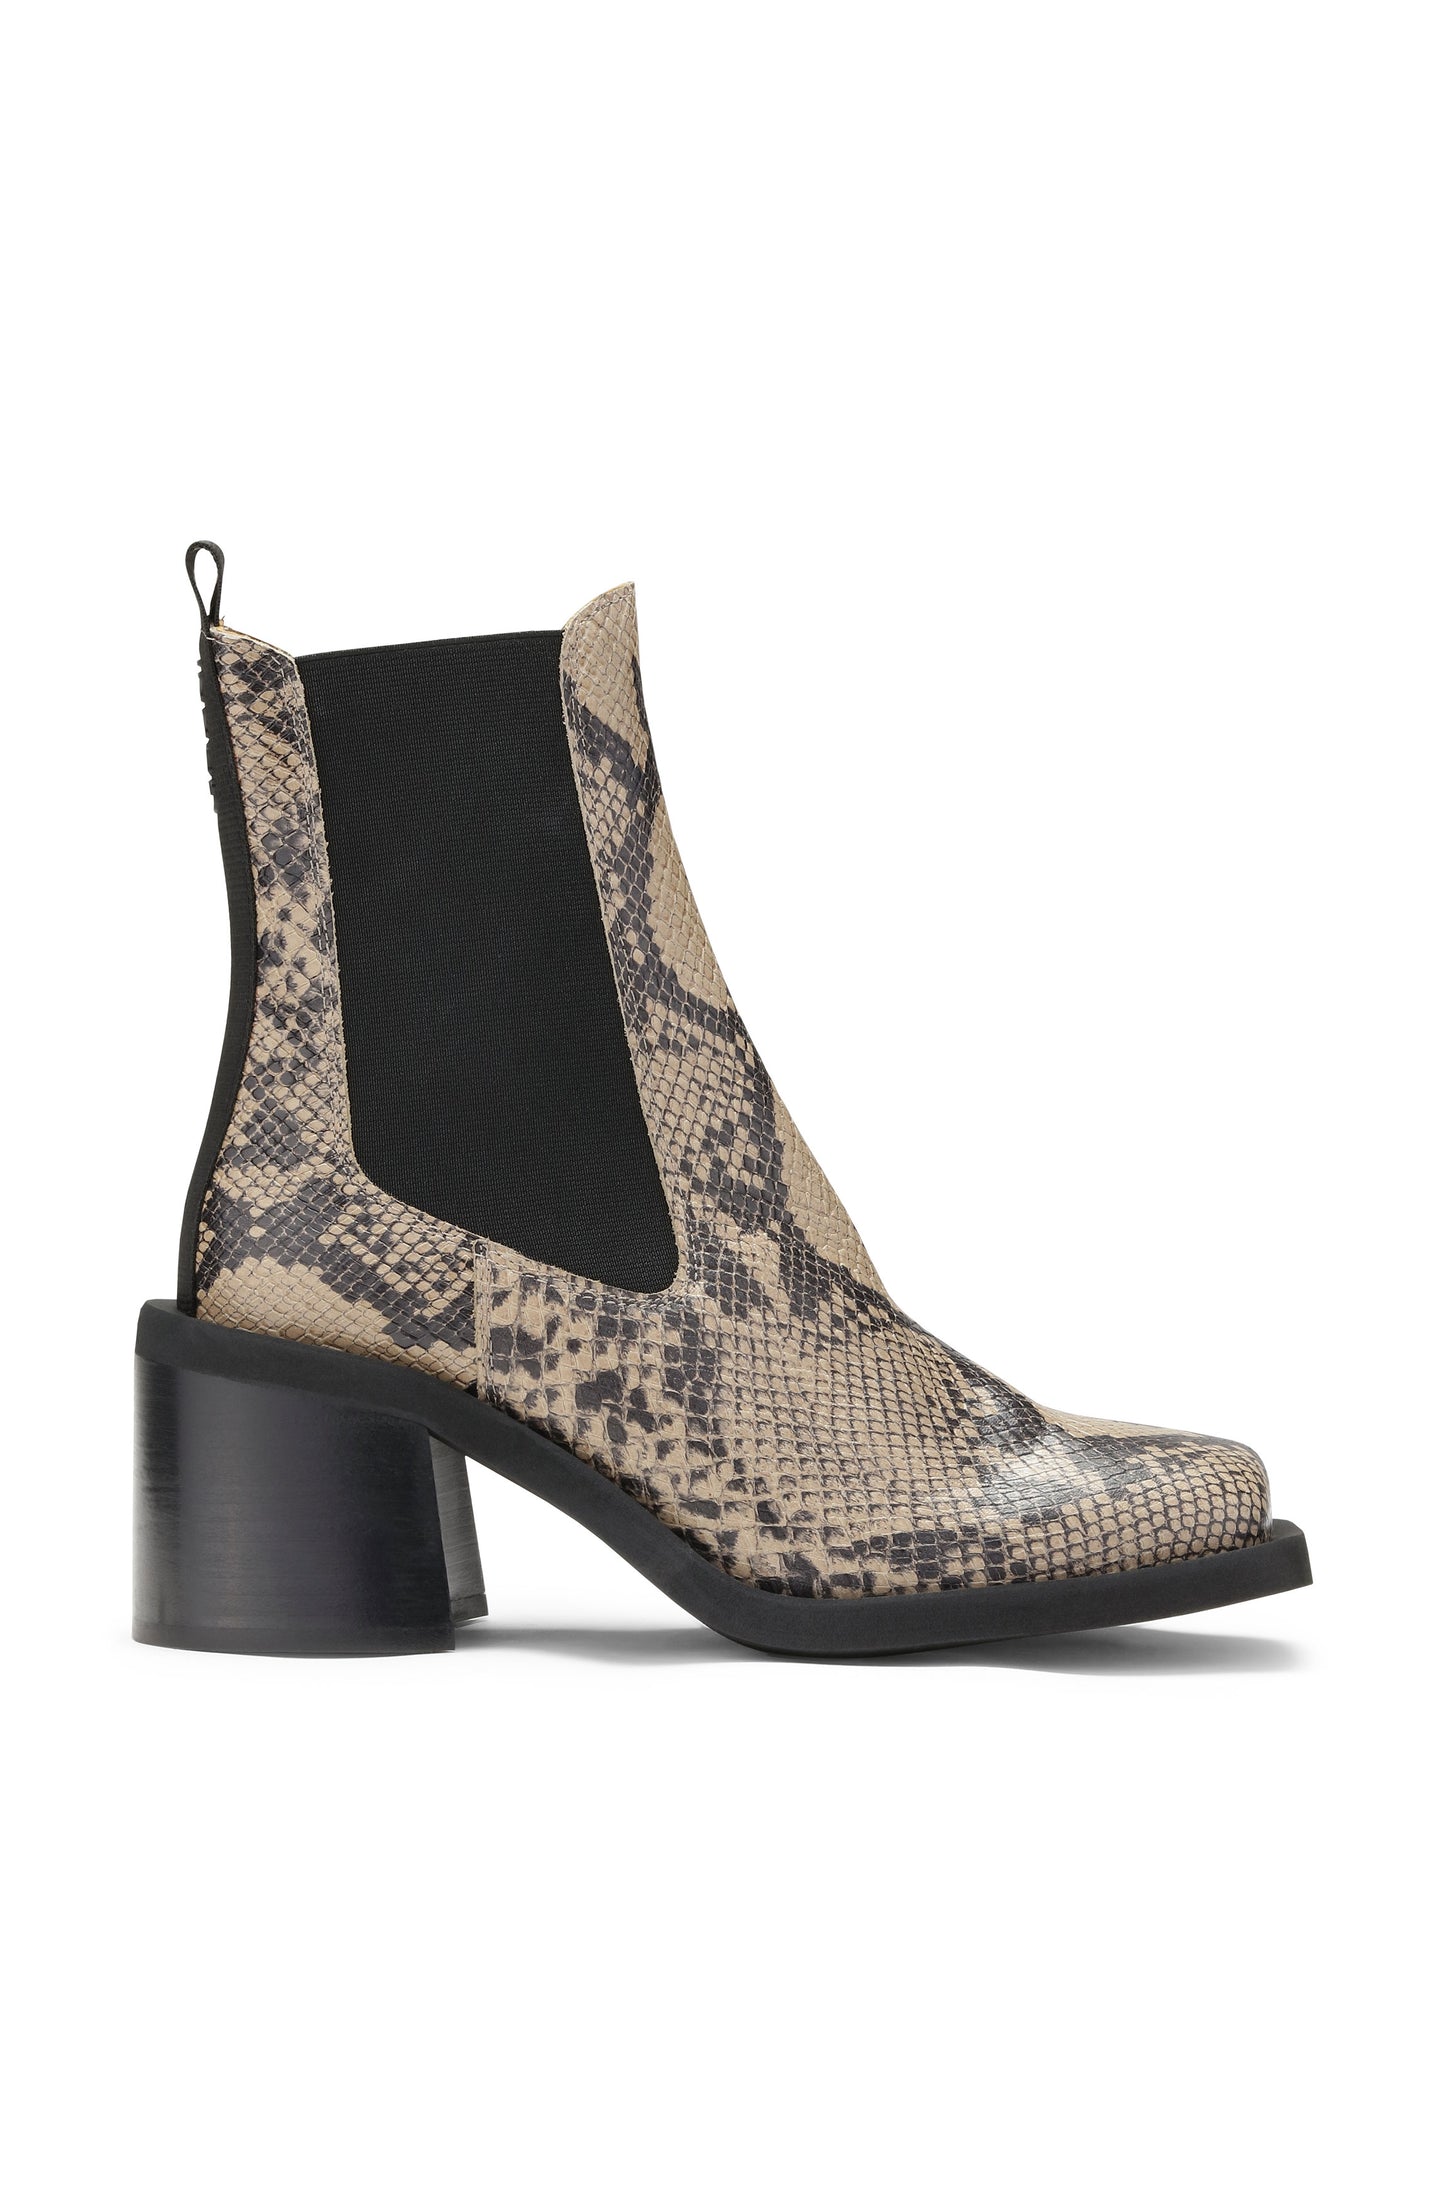 WIDE WELT SQUARED TOP HEELED CHELSEA BOOT